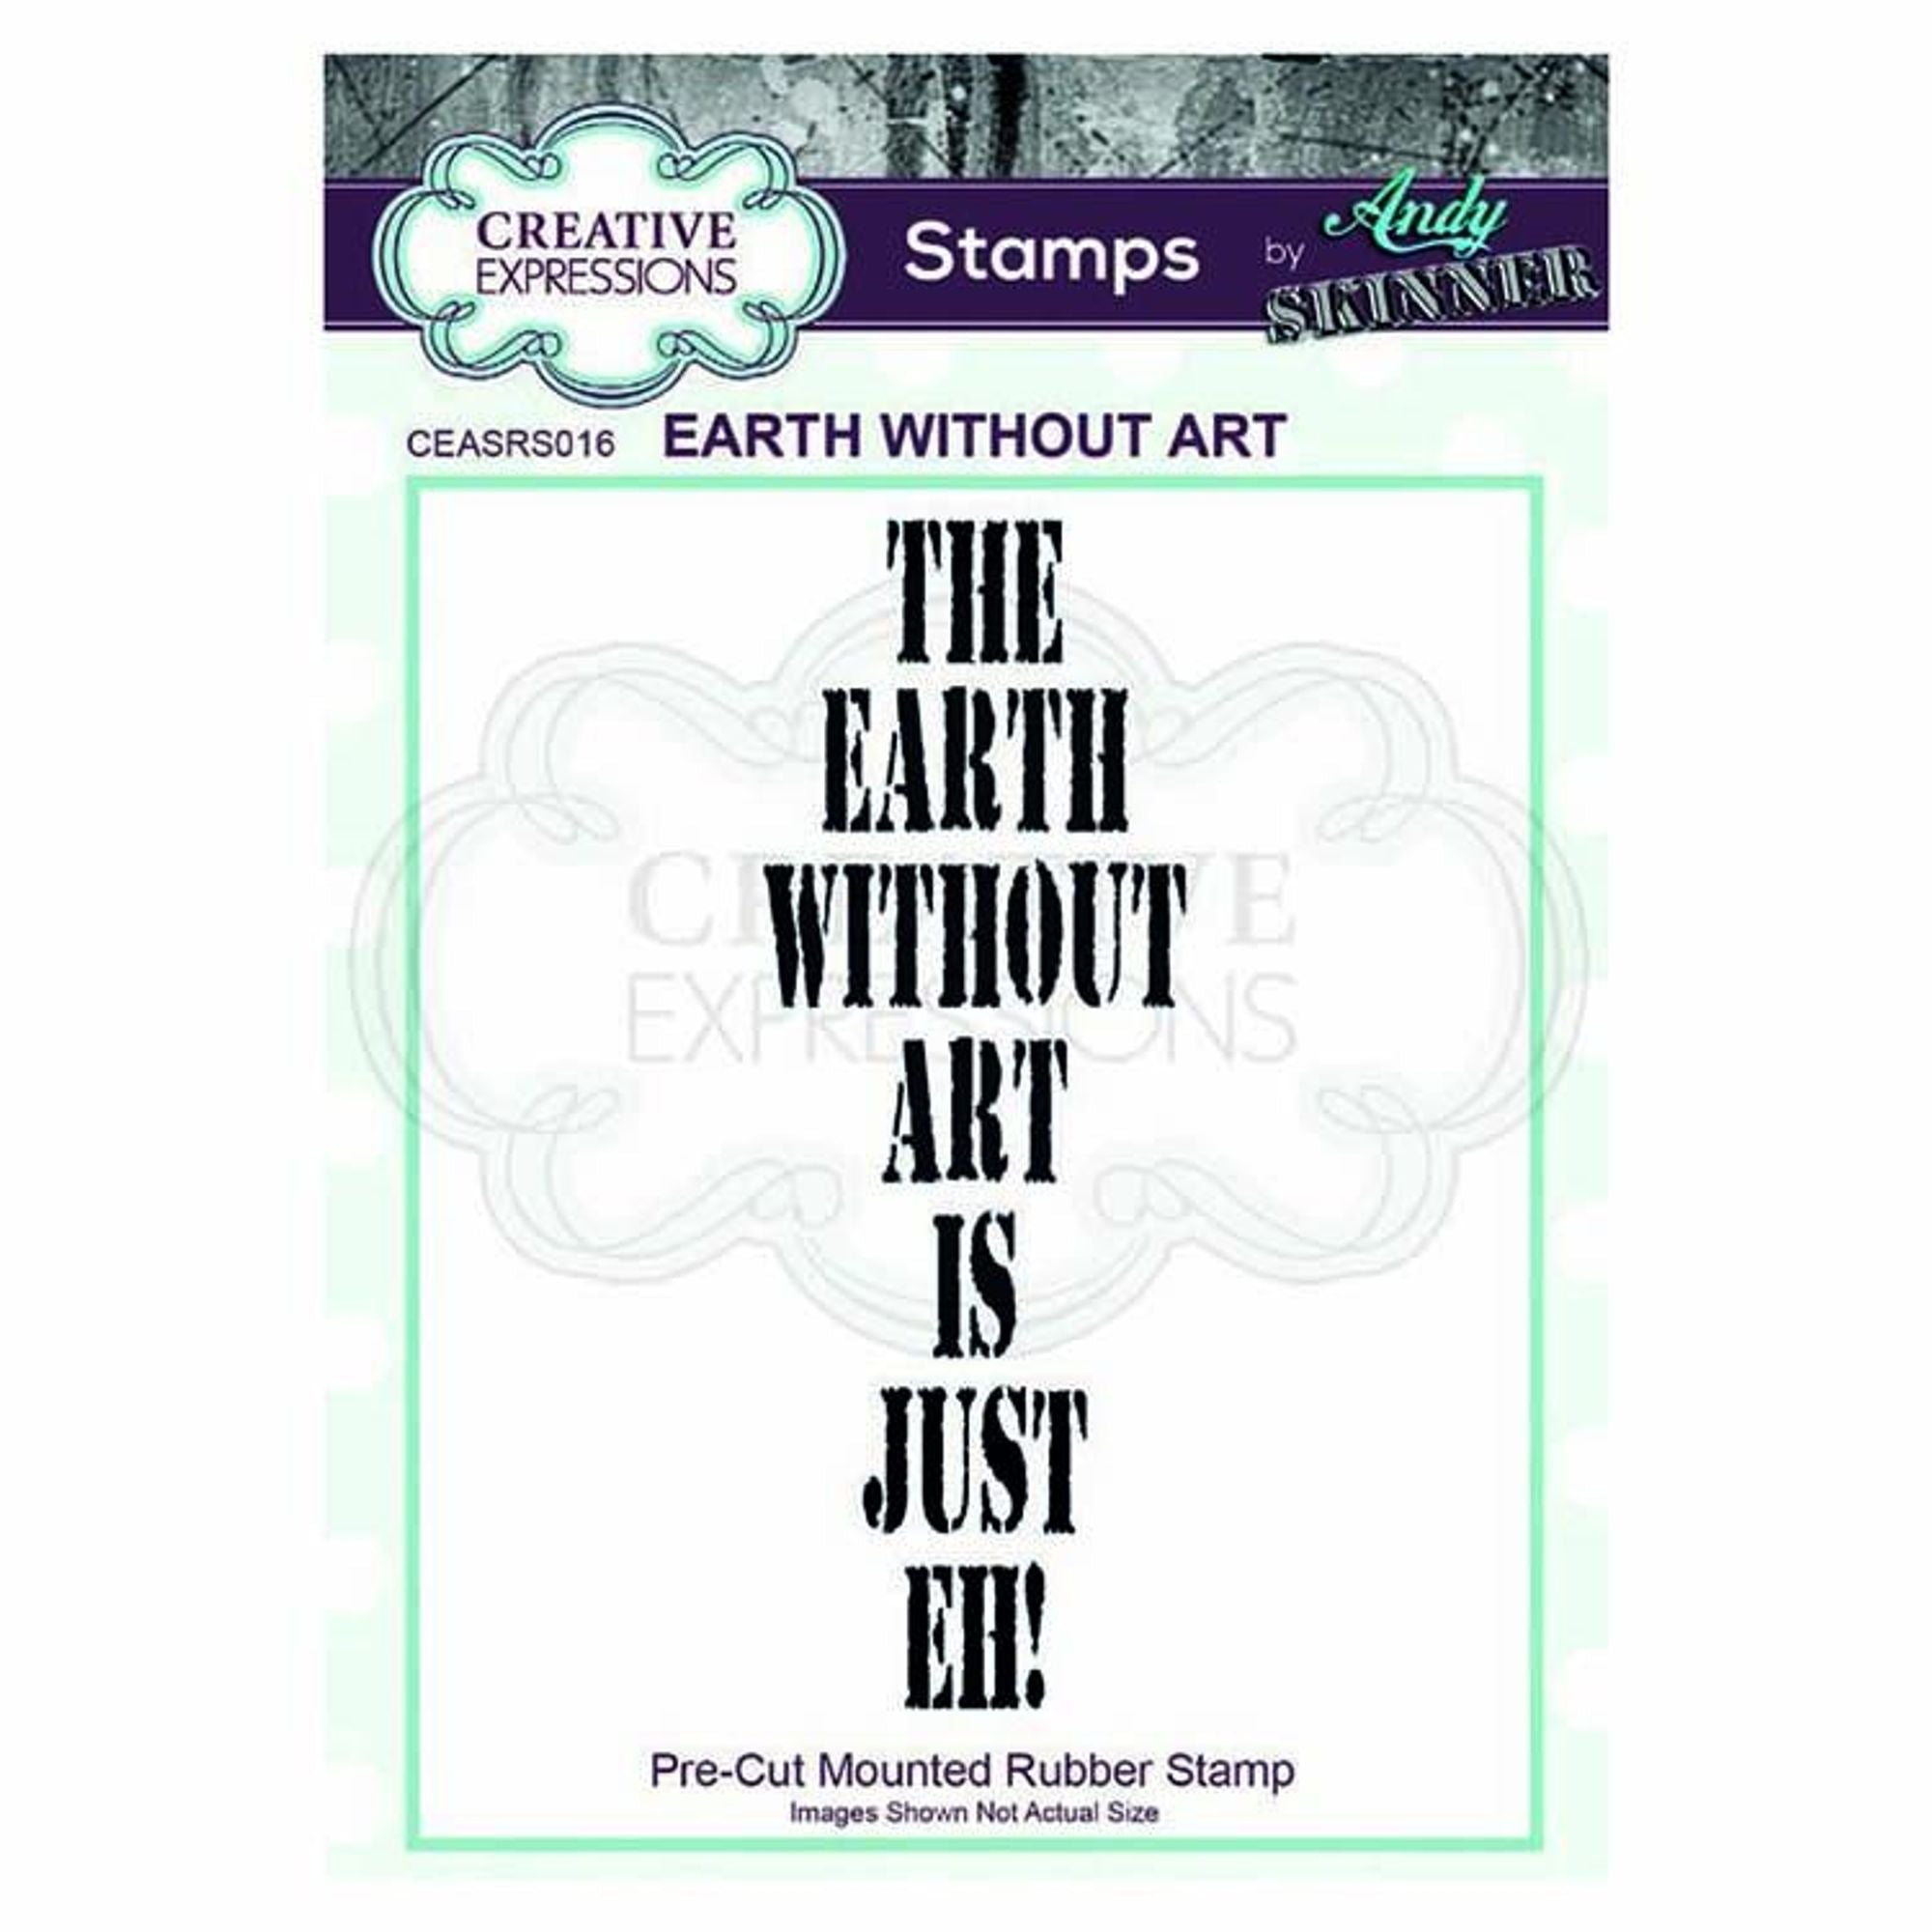 Creative Expressions  Pre Cut Rubber Stamp by Andy Skinner Earth Without Art